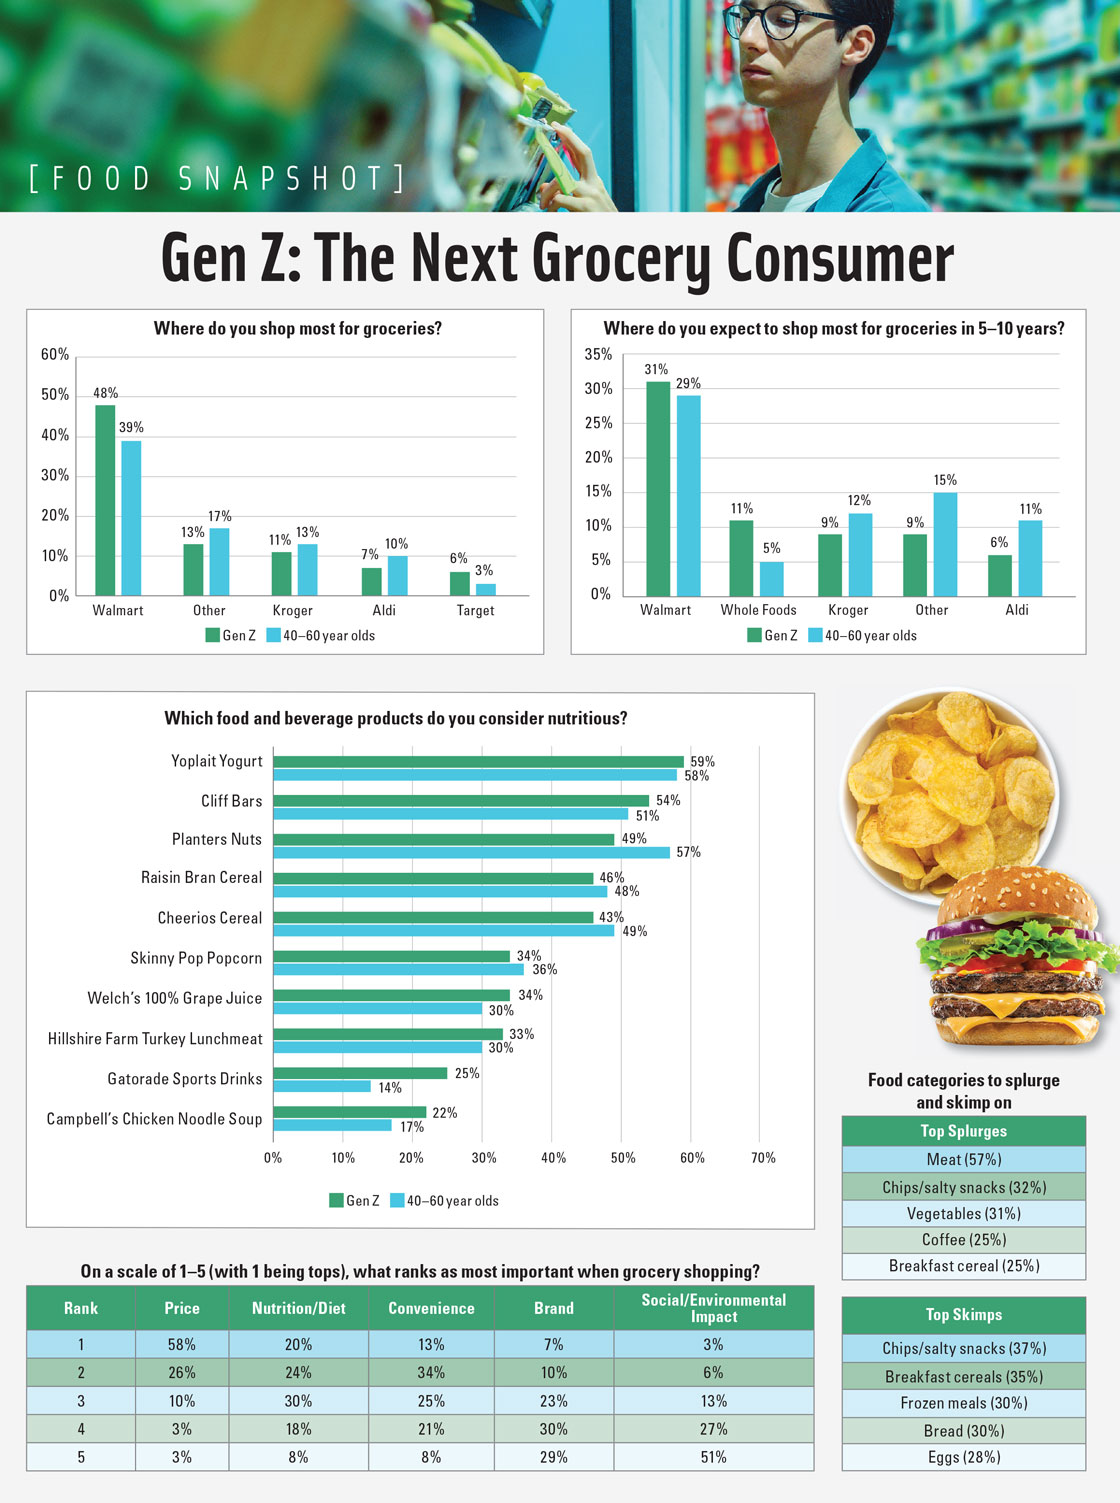 Gen Z: The Next Grocery Consumer. Source: Grocery Shopping With Gen Z, Field Agent, Spring 2019.